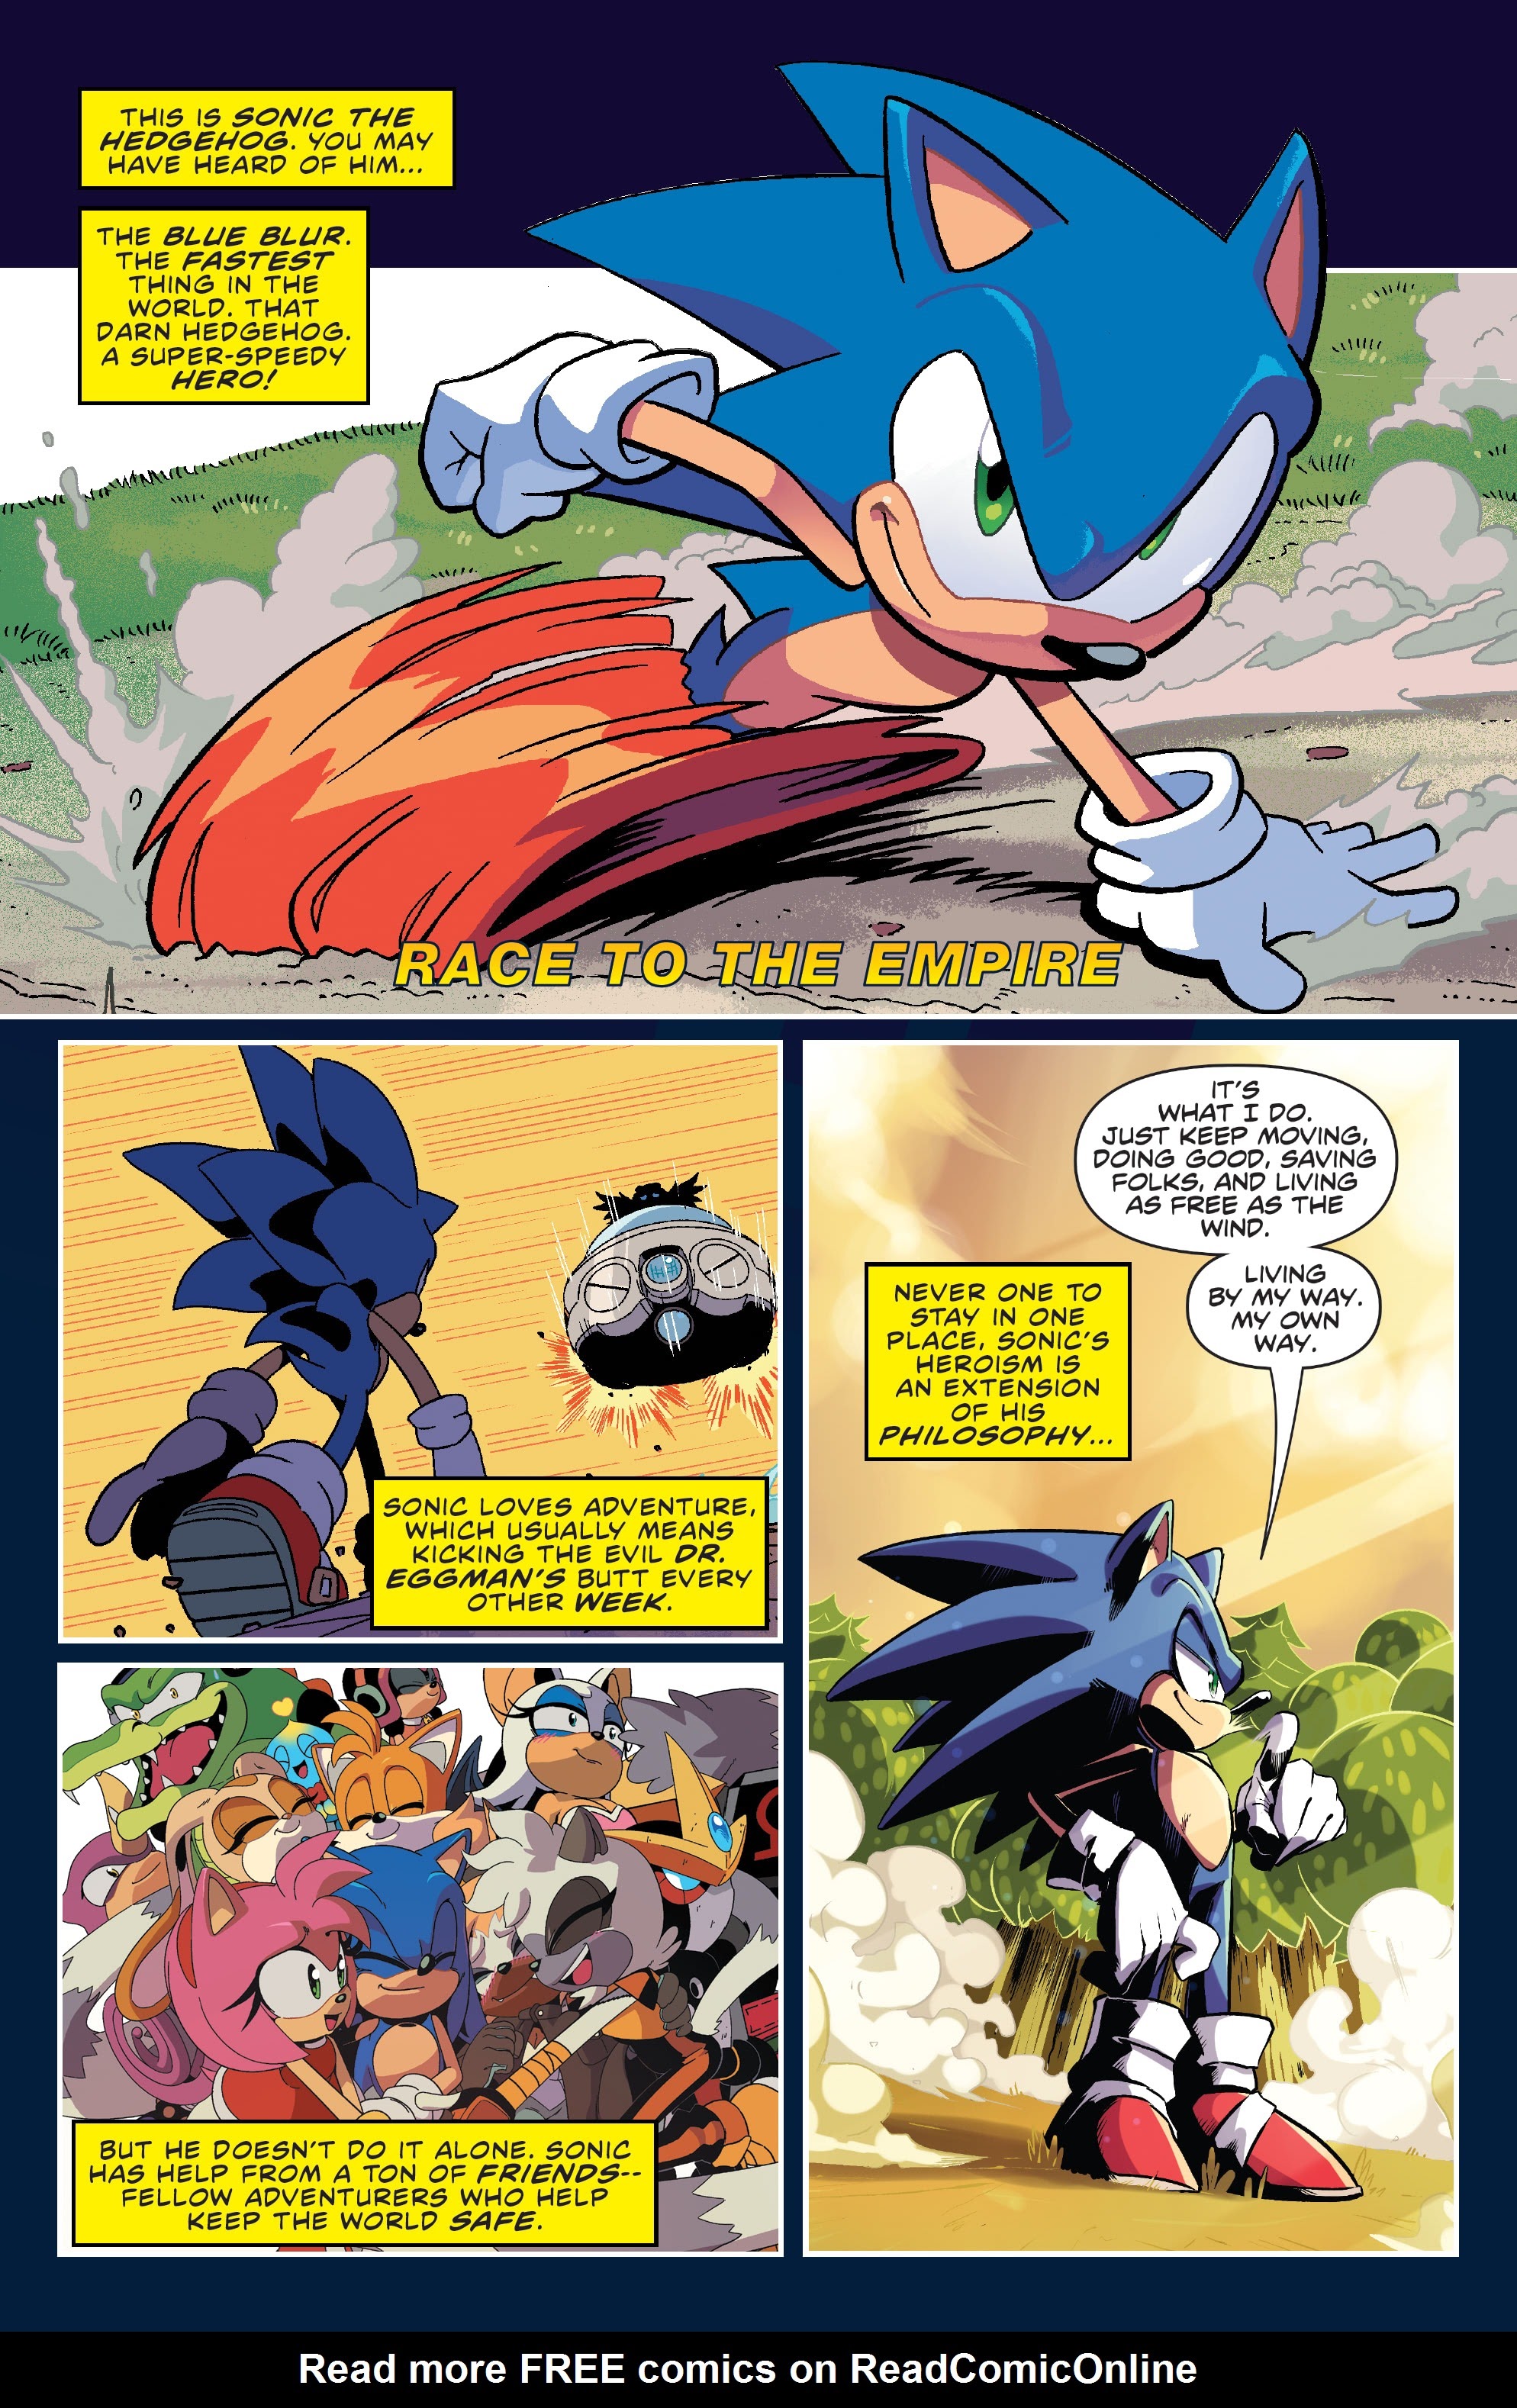 Read online Free Comic Book Day 2021 comic -  Issue # Sonic the Hedgehog 30th Anniversary Special - 12